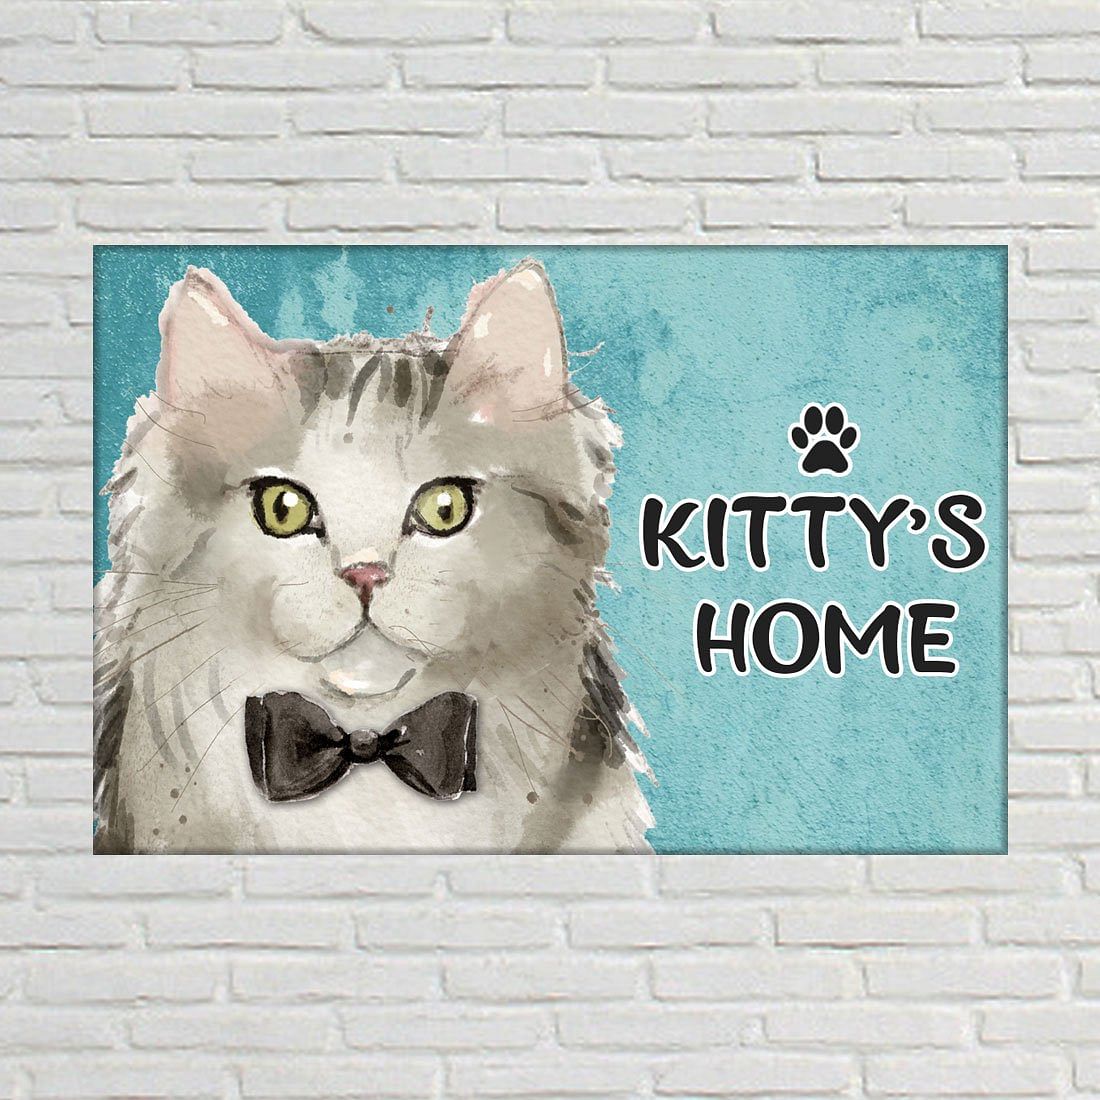 Personalized Cat Name Plate Customzied Beware Of Cat Sign Board Home Door Plaque - Ragamuffin Nutcase